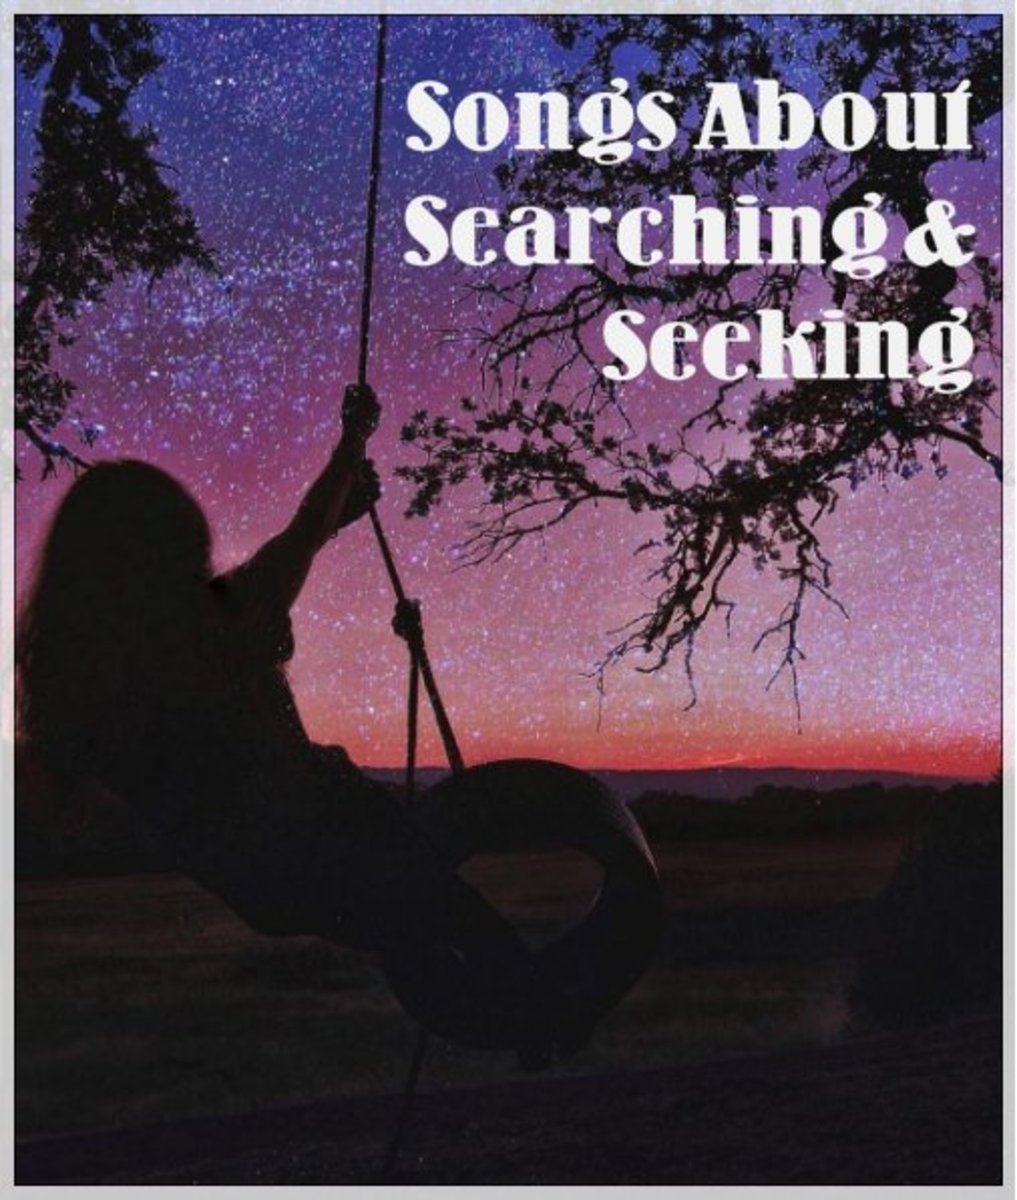 64 Songs About Searching and Seeking